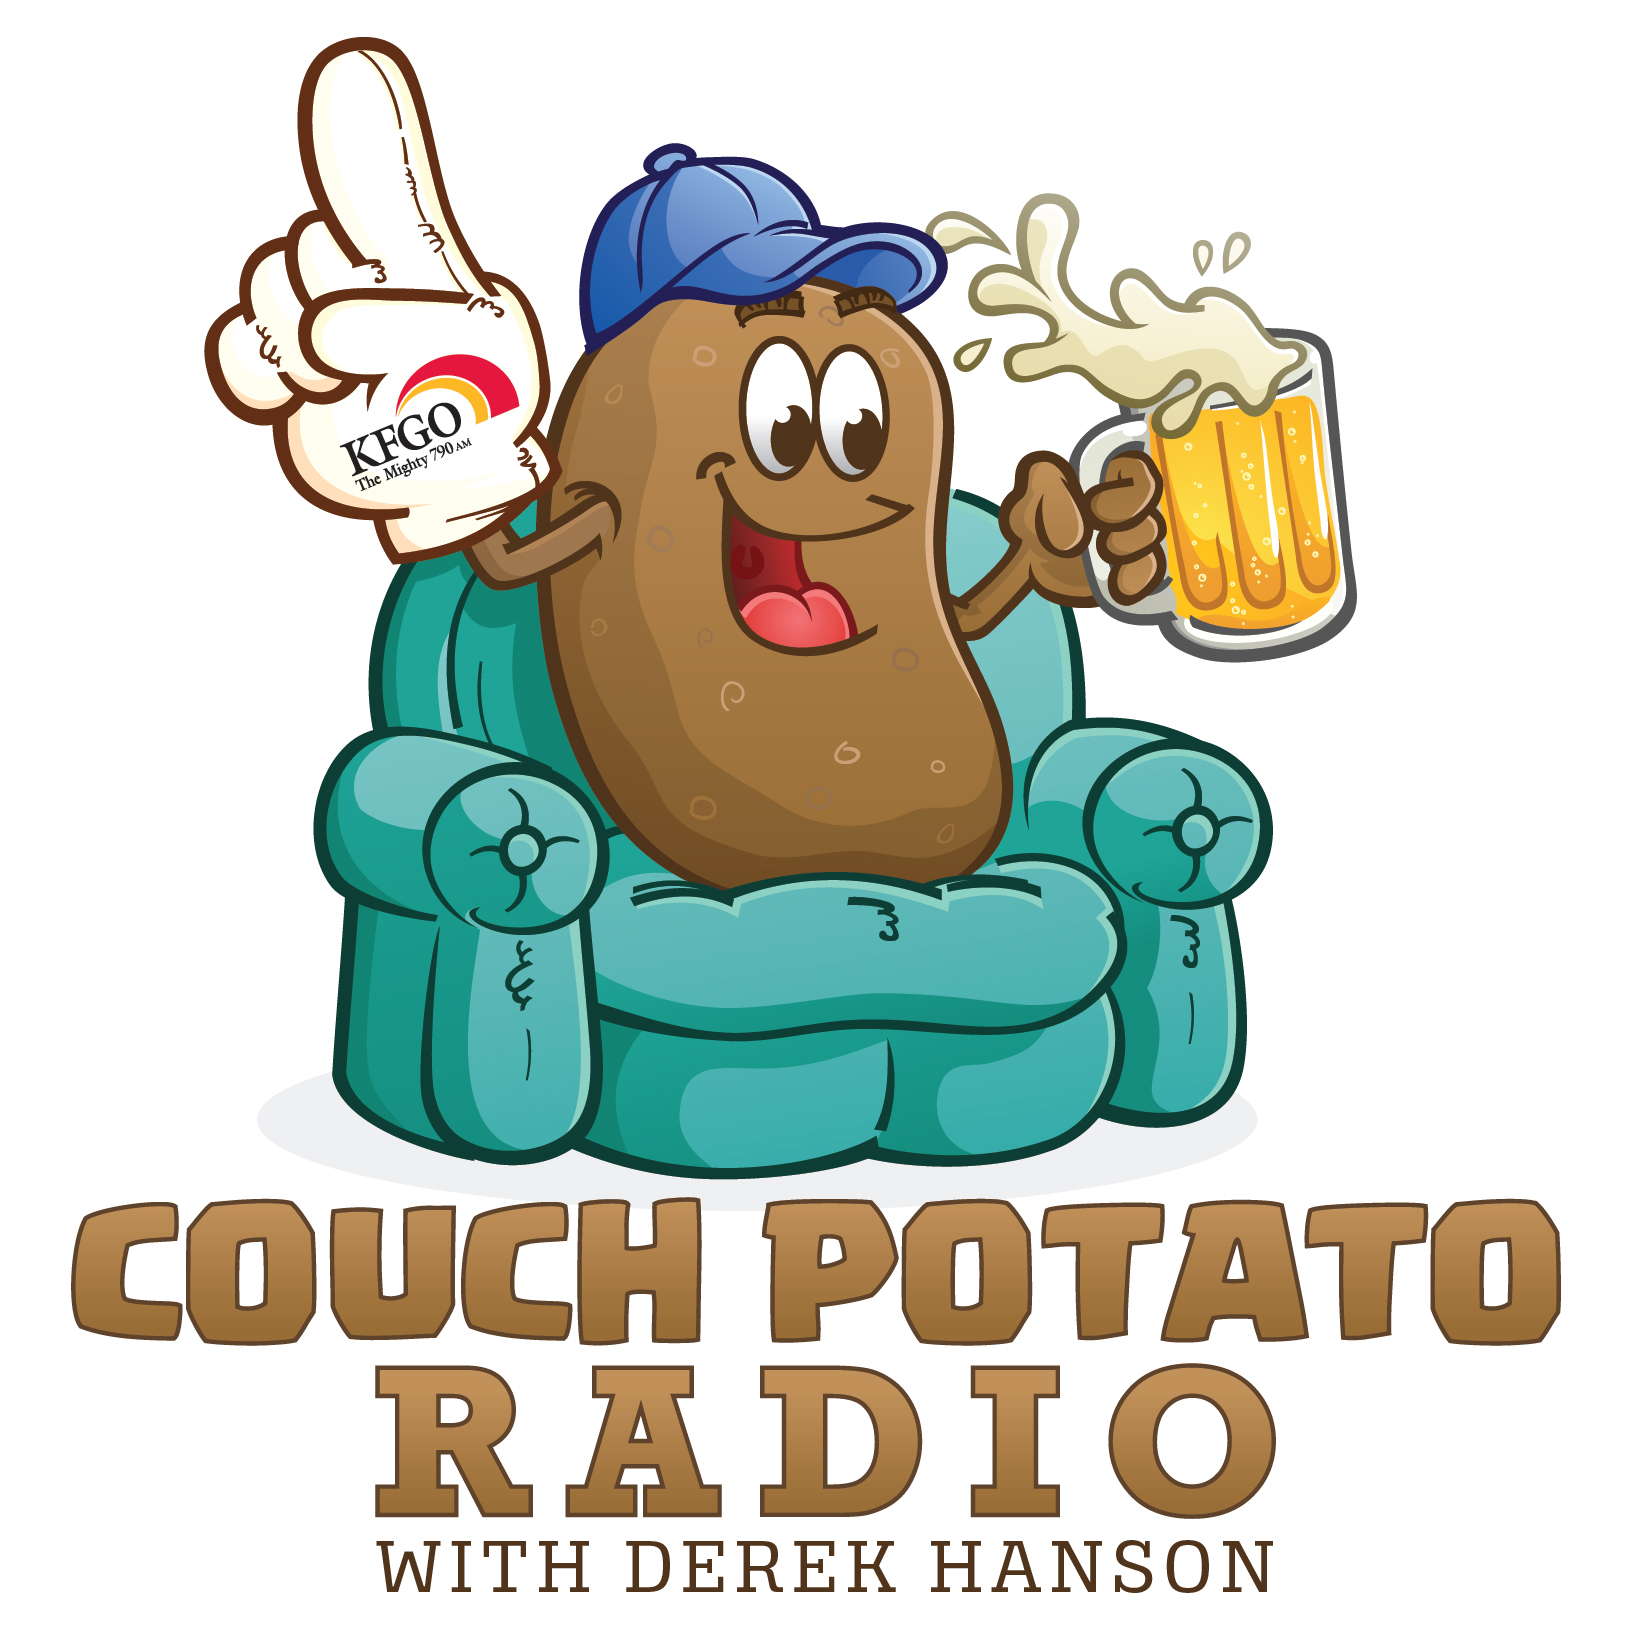 Couch Potato Radio, Jeff Kolpack joins the show!